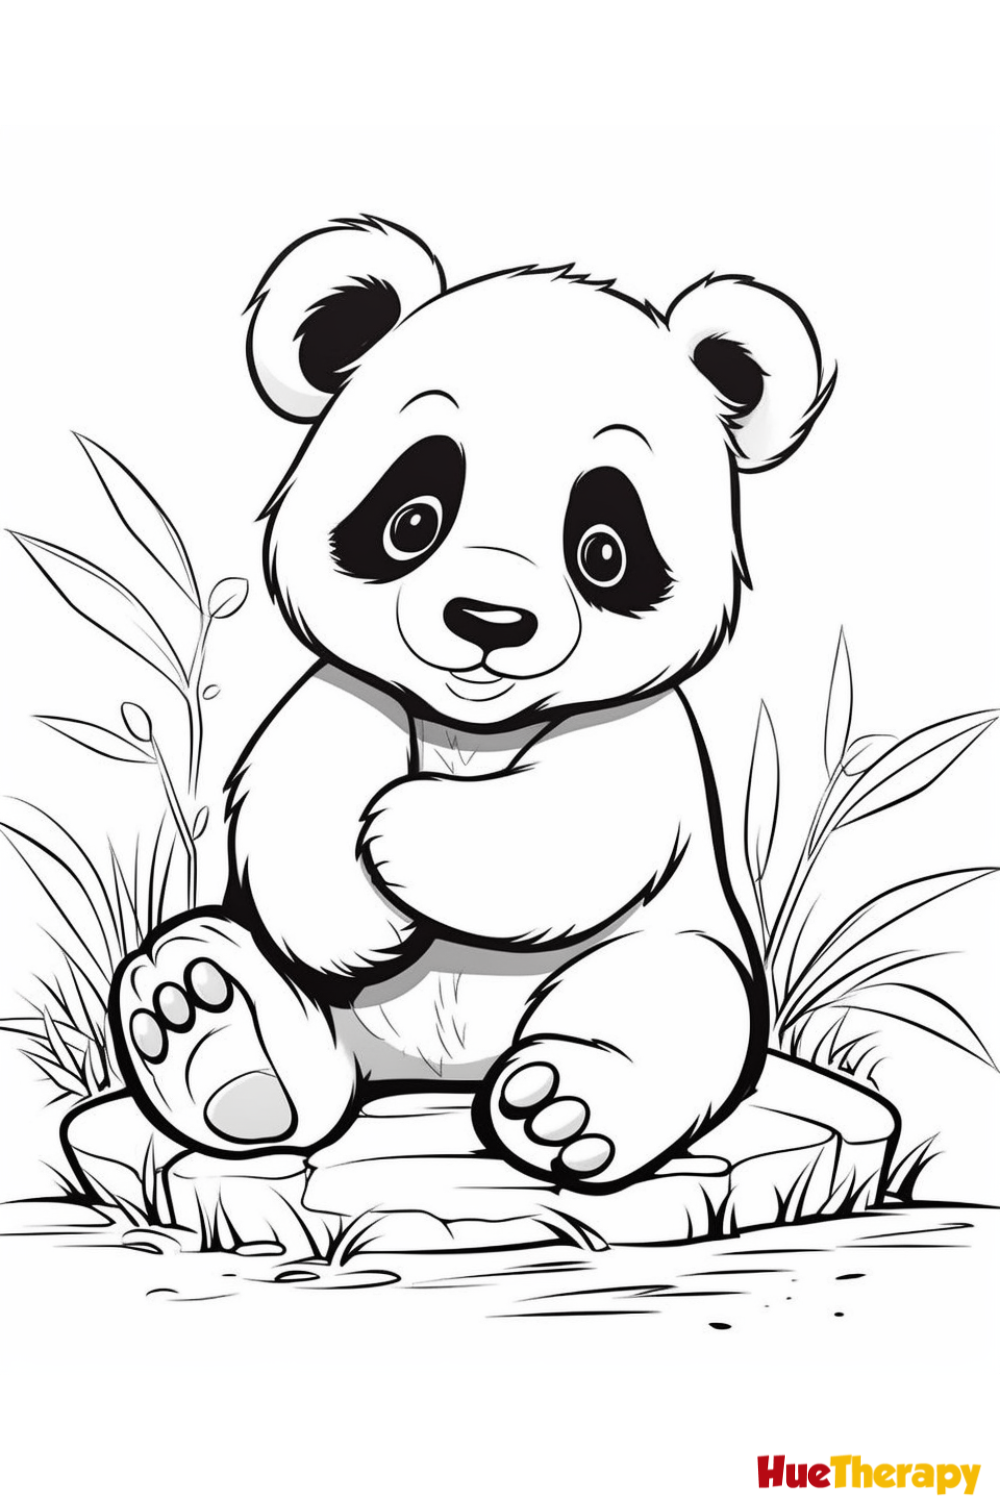 Free printable panda coloring pages for kids panda coloring pages bear coloring pages bunny coloring pages